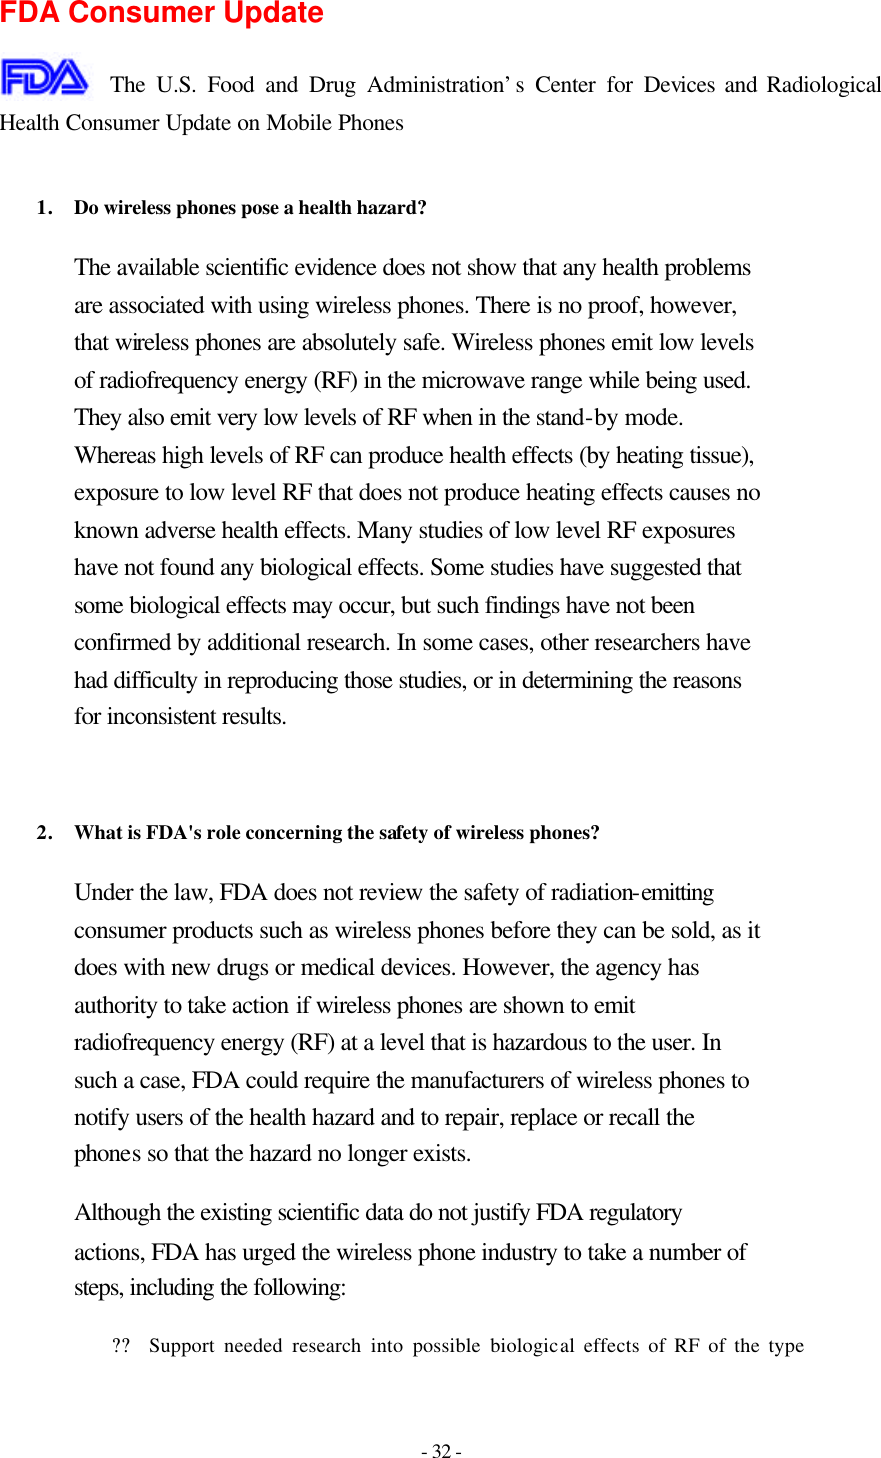 - 32 - FDA Consumer Update  The U.S. Food and Drug Administration’s Center for Devices and Radiological Health Consumer Update on Mobile Phones  1. Do wireless phones pose a health hazard?  The available scientific evidence does not show that any health problems are associated with using wireless phones. There is no proof, however, that wireless phones are absolutely safe. Wireless phones emit low levels of radiofrequency energy (RF) in the microwave range while being used. They also emit very low levels of RF when in the stand-by mode. Whereas high levels of RF can produce health effects (by heating tissue), exposure to low level RF that does not produce heating effects causes no known adverse health effects. Many studies of low level RF exposures have not found any biological effects. Some studies have suggested that some biological effects may occur, but such findings have not been confirmed by additional research. In some cases, other researchers have had difficulty in reproducing those studies, or in determining the reasons for inconsistent results.   2. What is FDA&apos;s role concerning the safety of wireless phones?  Under the law, FDA does not review the safety of radiation-emitting consumer products such as wireless phones before they can be sold, as it does with new drugs or medical devices. However, the agency has authority to take action if wireless phones are shown to emit radiofrequency energy (RF) at a level that is hazardous to the user. In such a case, FDA could require the manufacturers of wireless phones to notify users of the health hazard and to repair, replace or recall the phones so that the hazard no longer exists. Although the existing scientific data do not justify FDA regulatory actions, FDA has urged the wireless phone industry to take a number of steps, including the following: ?? Support needed research into possible biological effects of RF of the type 